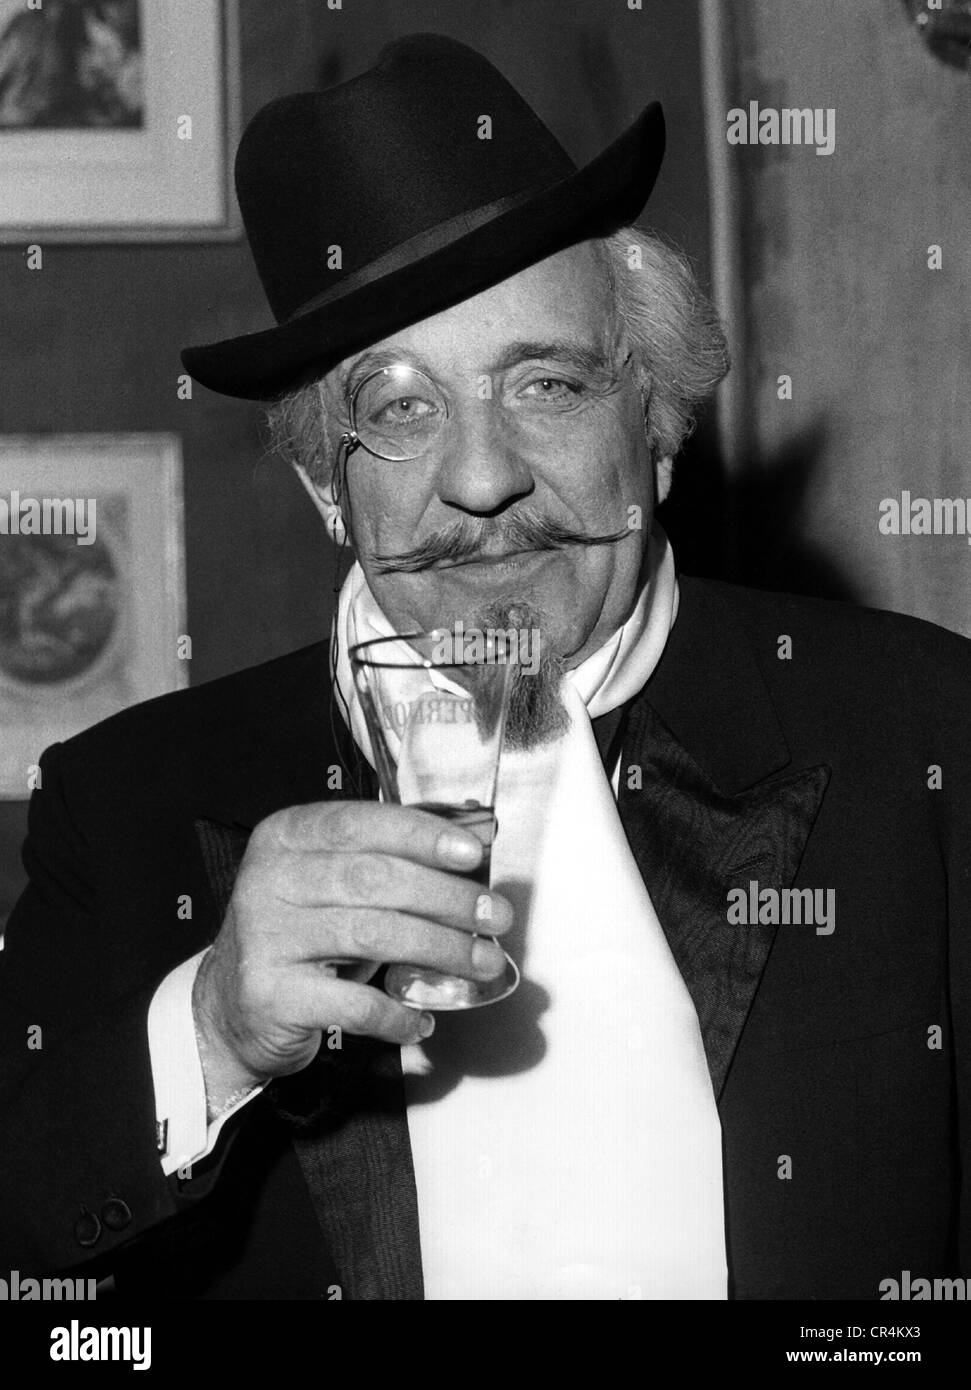 Hasse, Otto Eduard, 11.7.1903 - 12.9.1978, German film actor, scene from an unknown movie, 1960s, Stock Photo